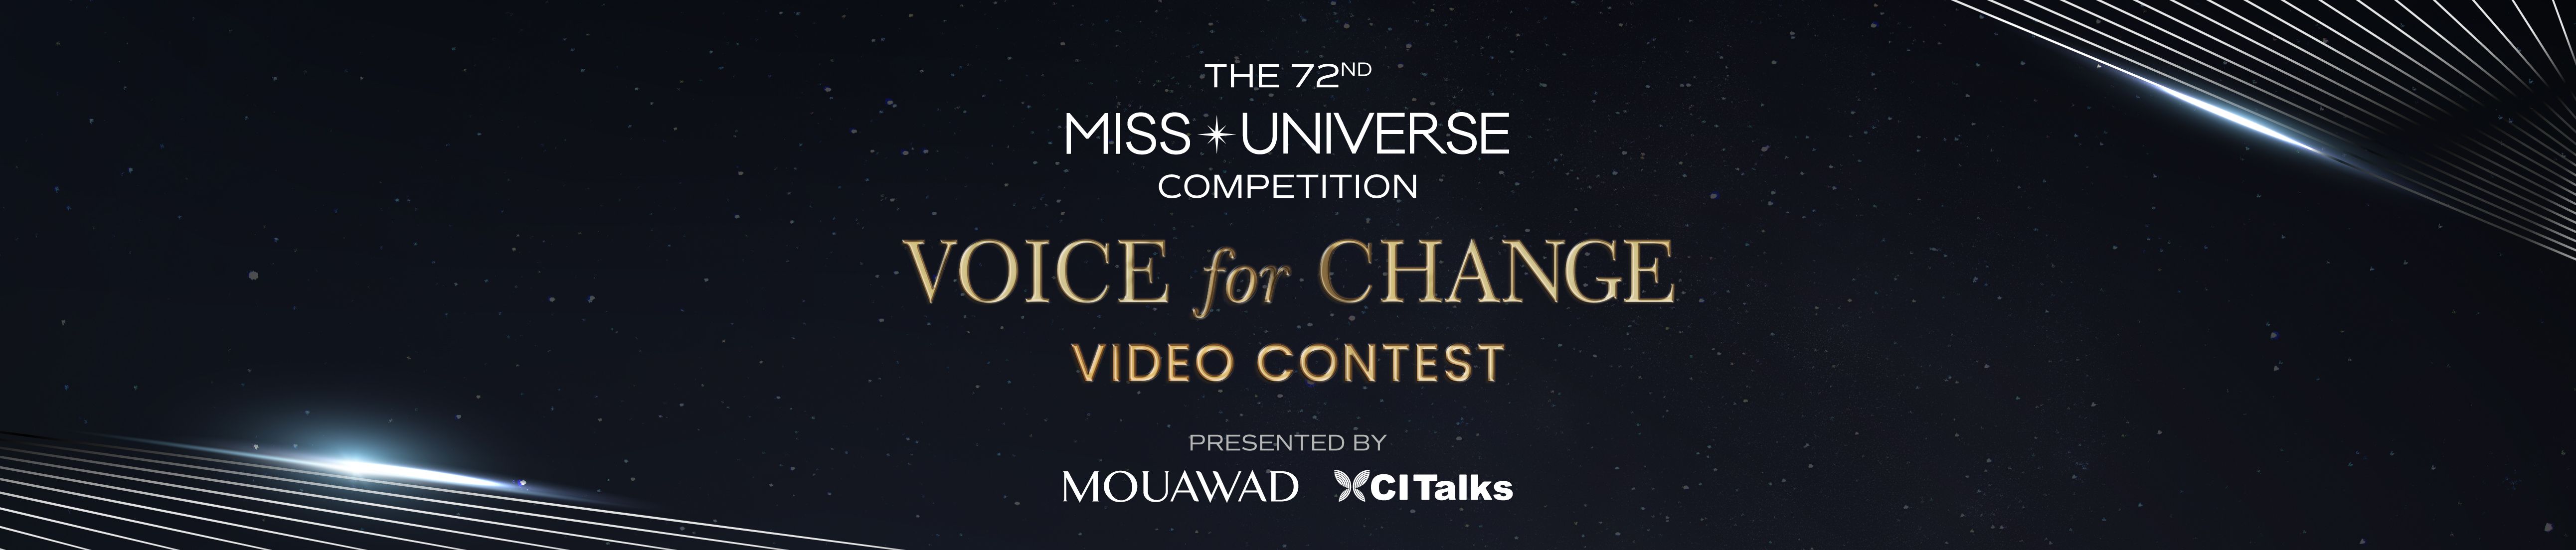 Miss Universe 2023 Delegates' Impactful Video Entries for 'Voice for Change' Contest by Mouawad and CI Talks